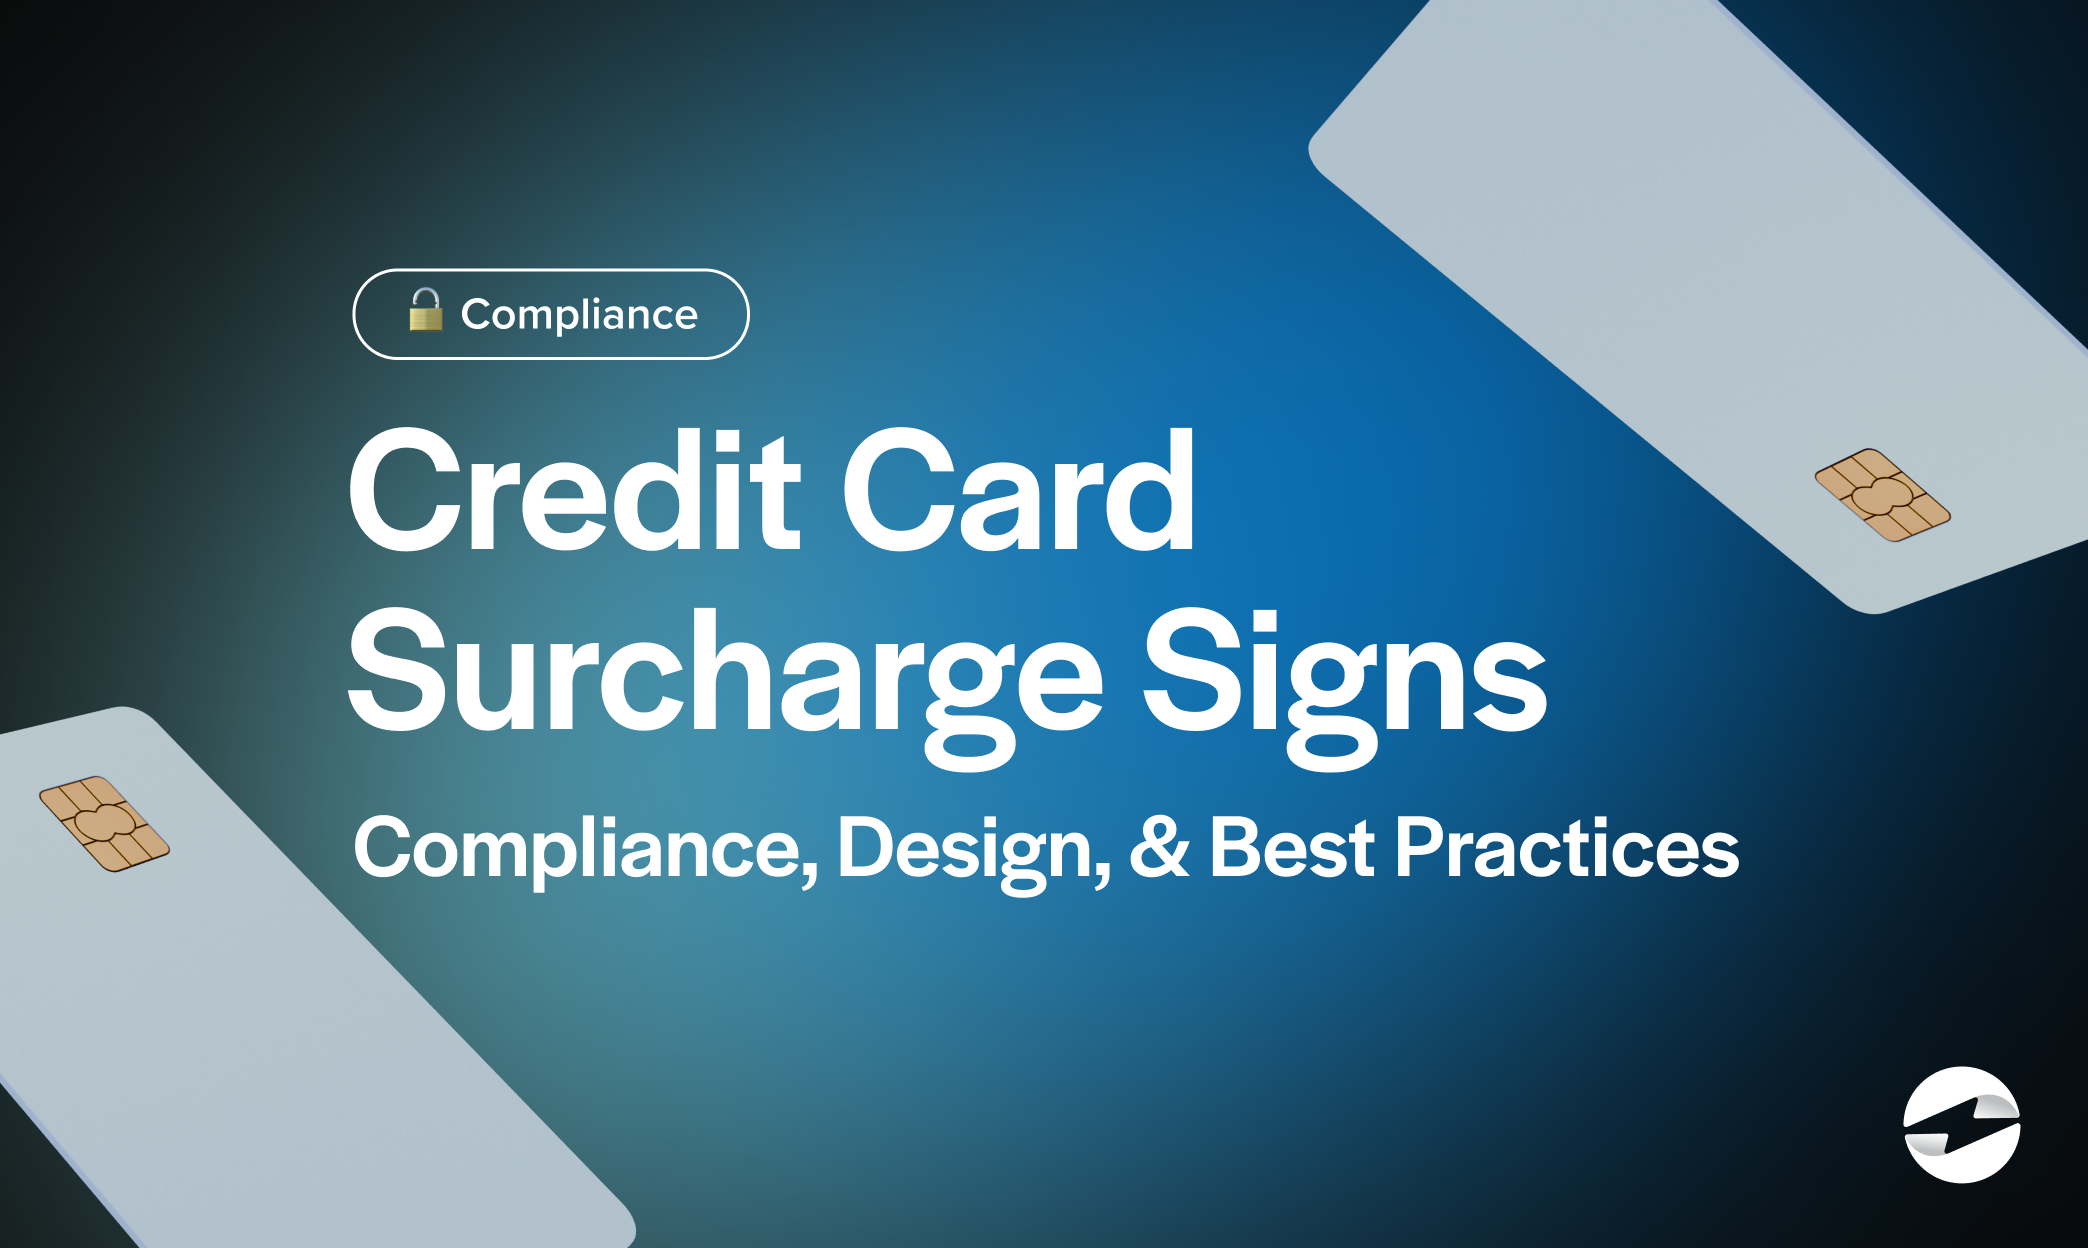 Credit Card Surcharge Signs: Compliance, Design, and Best Practices